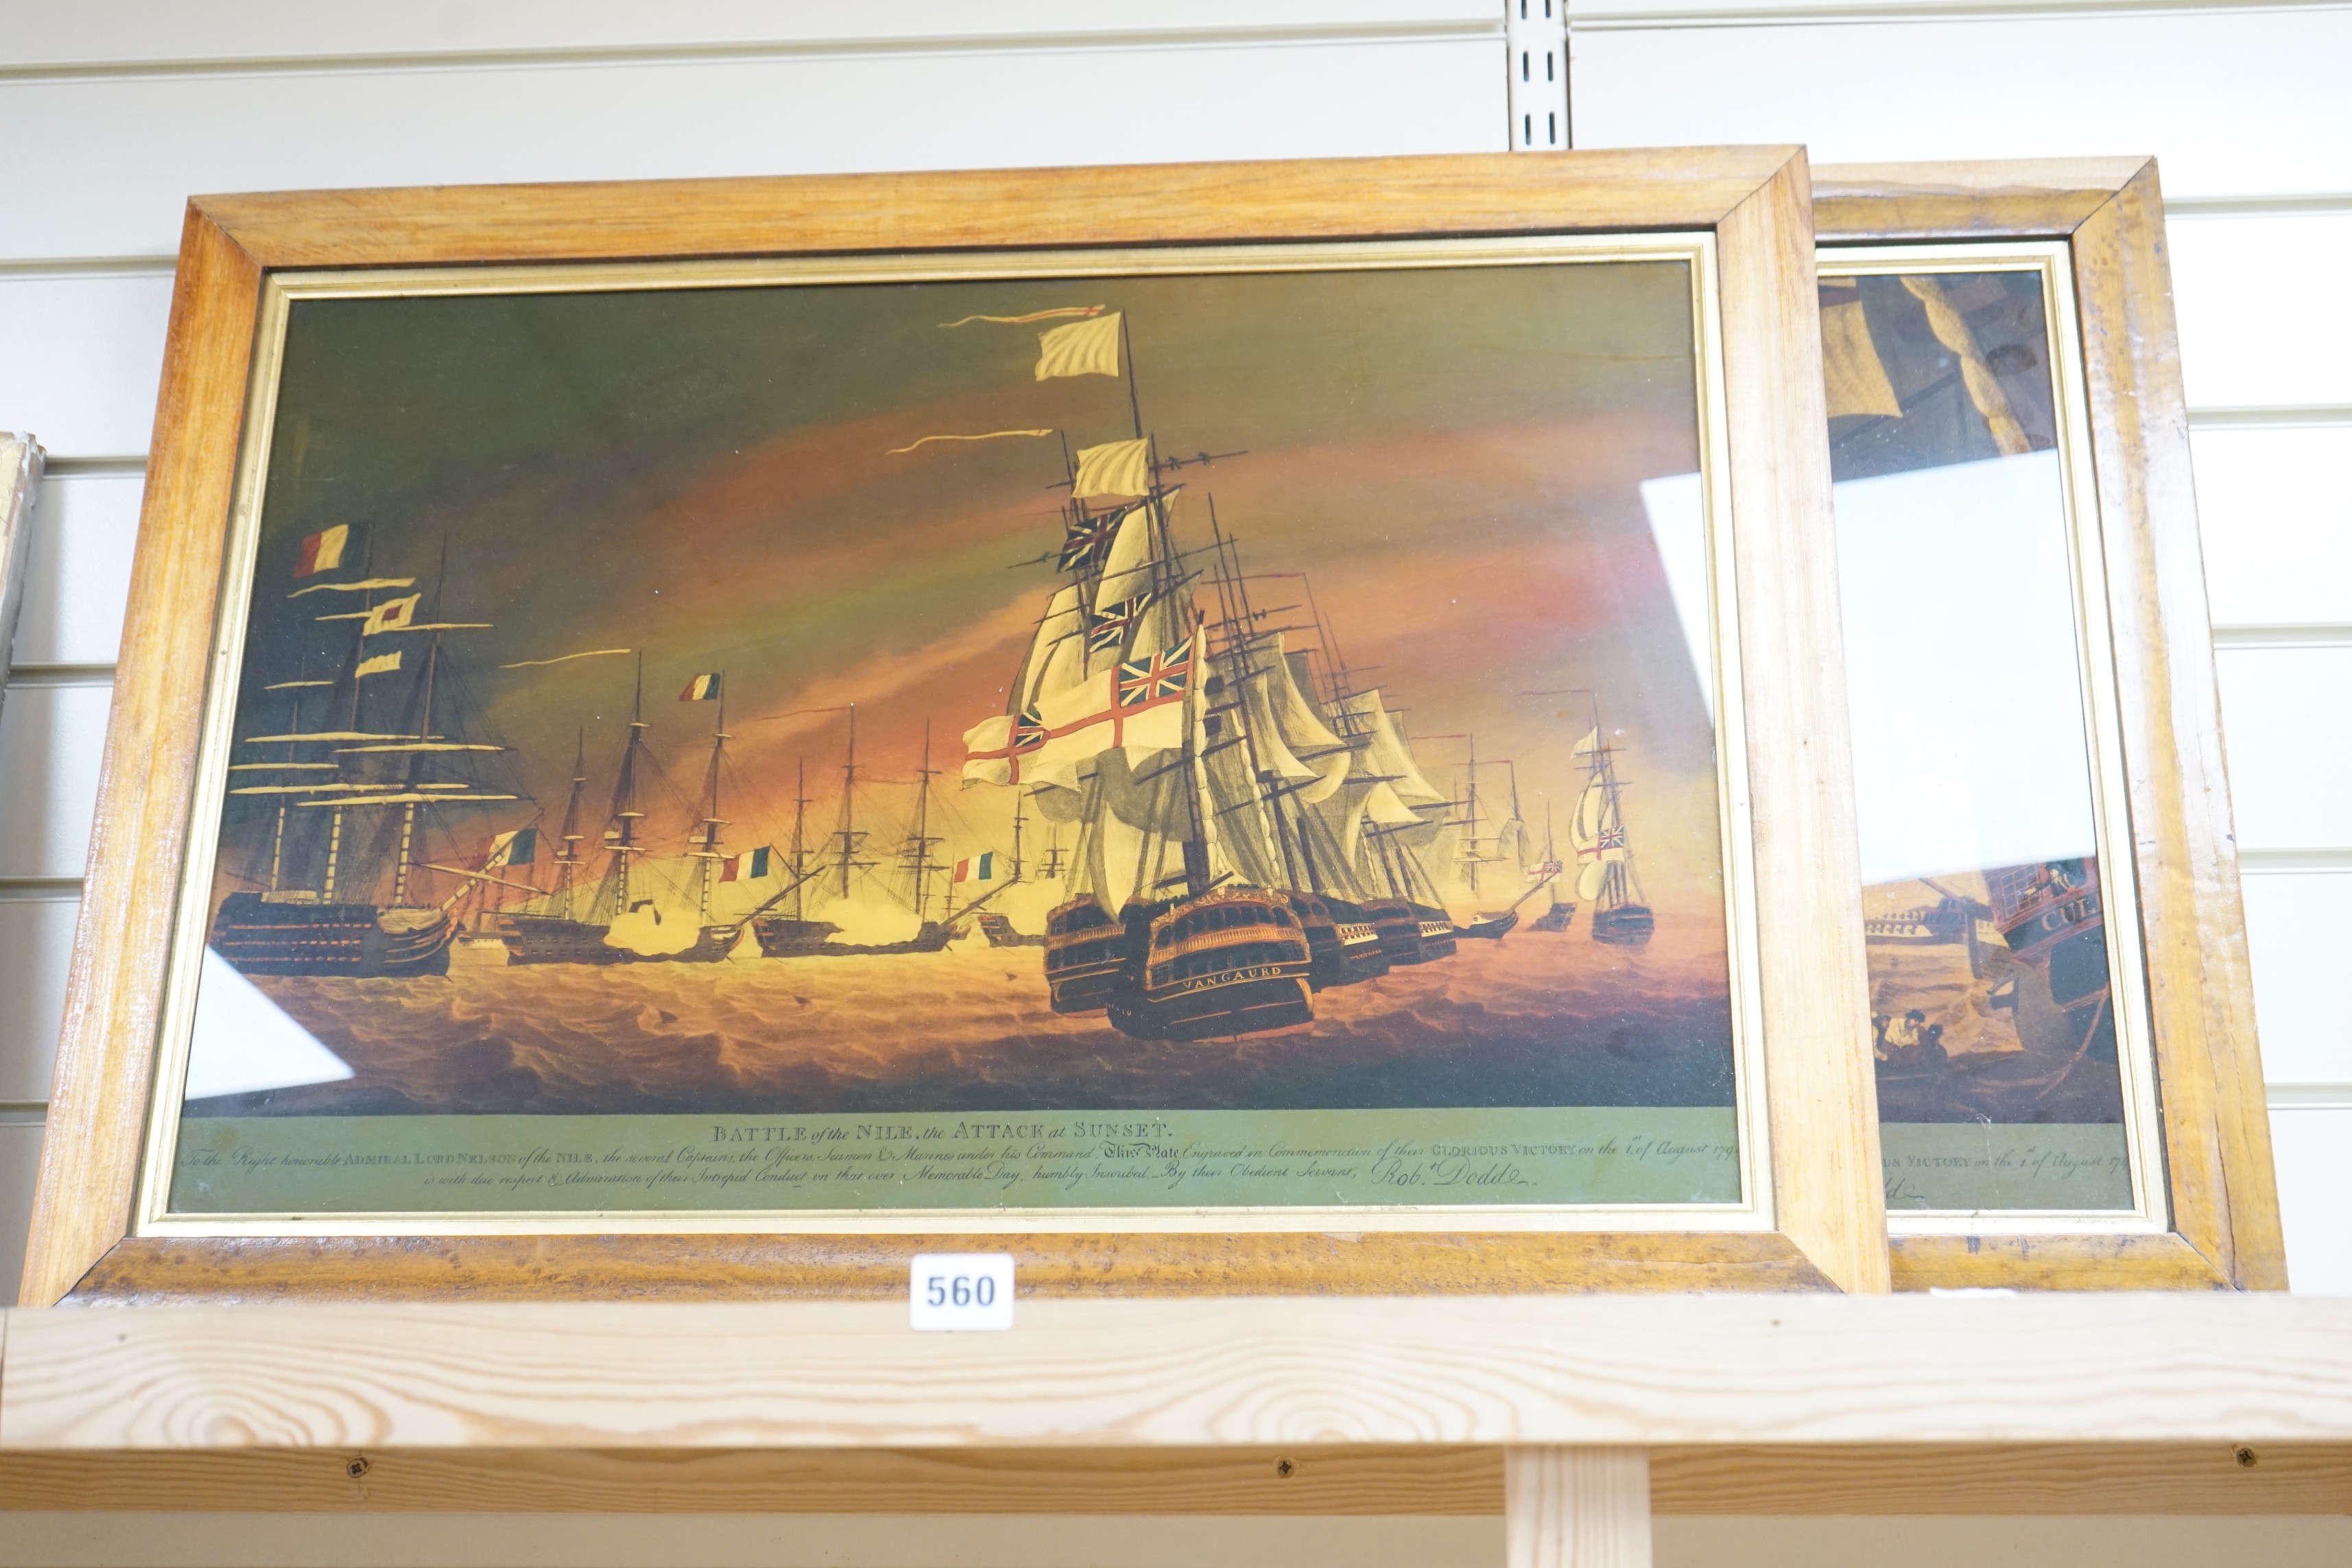 A pair of modern reprint reverse prints on glass, Views of the Battle of the Nile, 42 x 63cm - Image 3 of 3